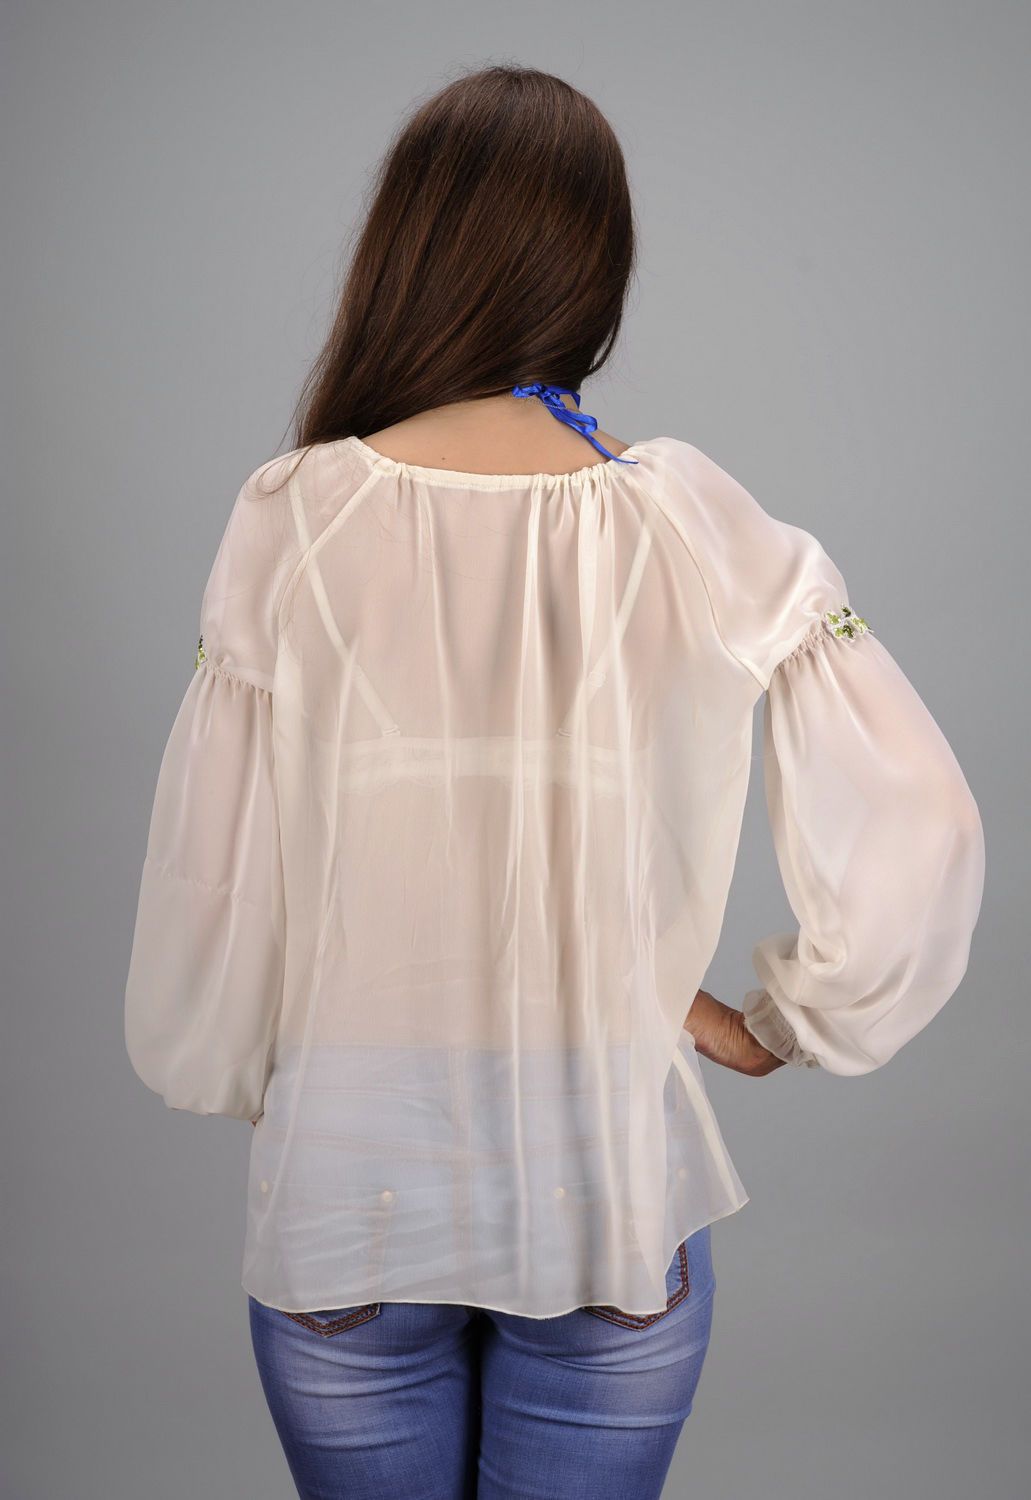 Blouse with long sleeves made of artificial chiffon photo 4